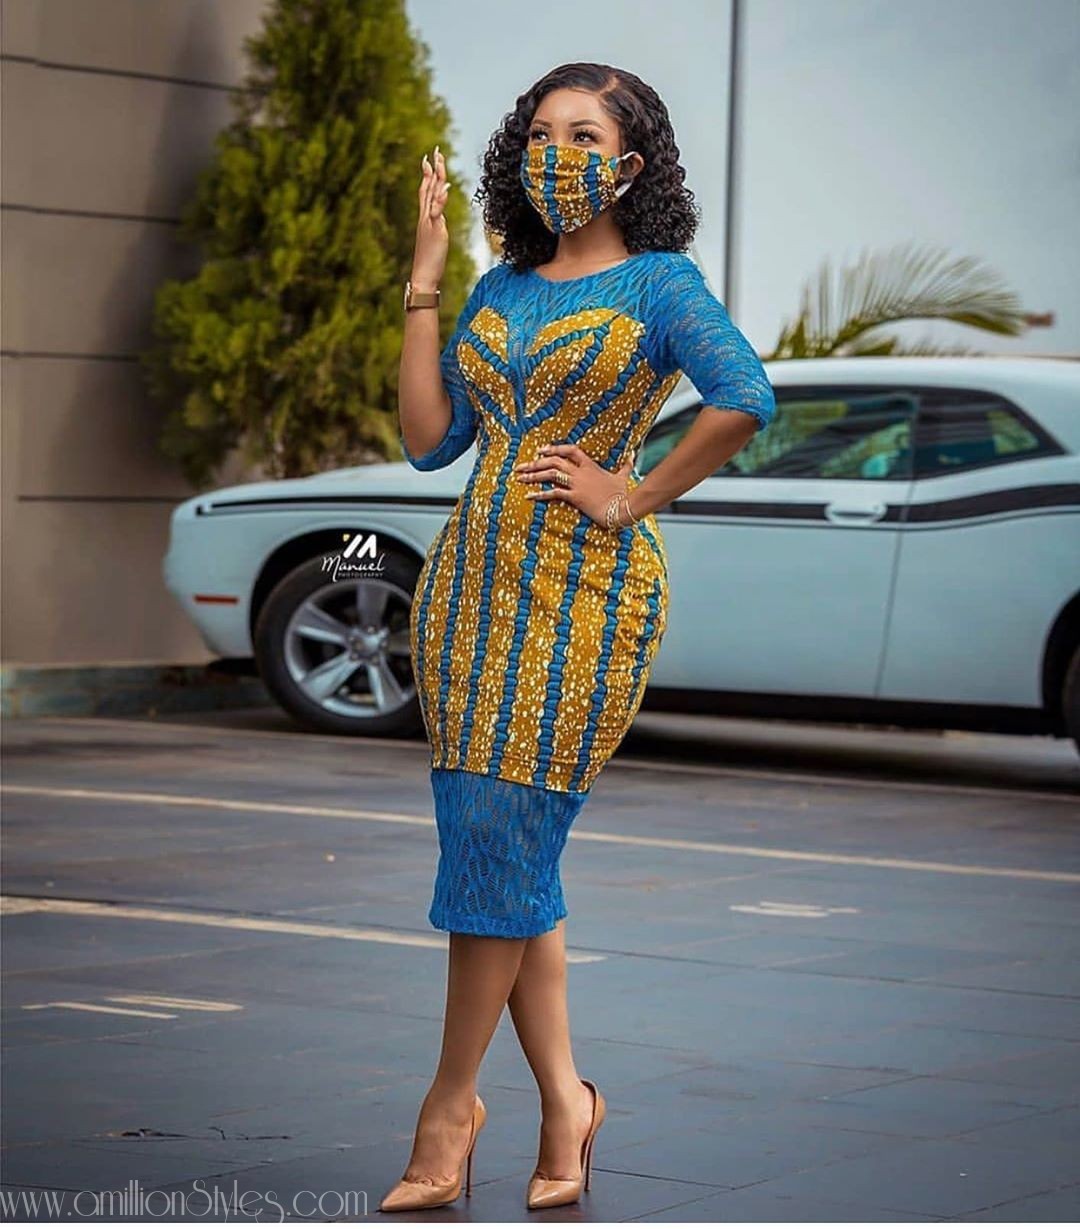 The 11 Best Ankara Styles You Will See Today!